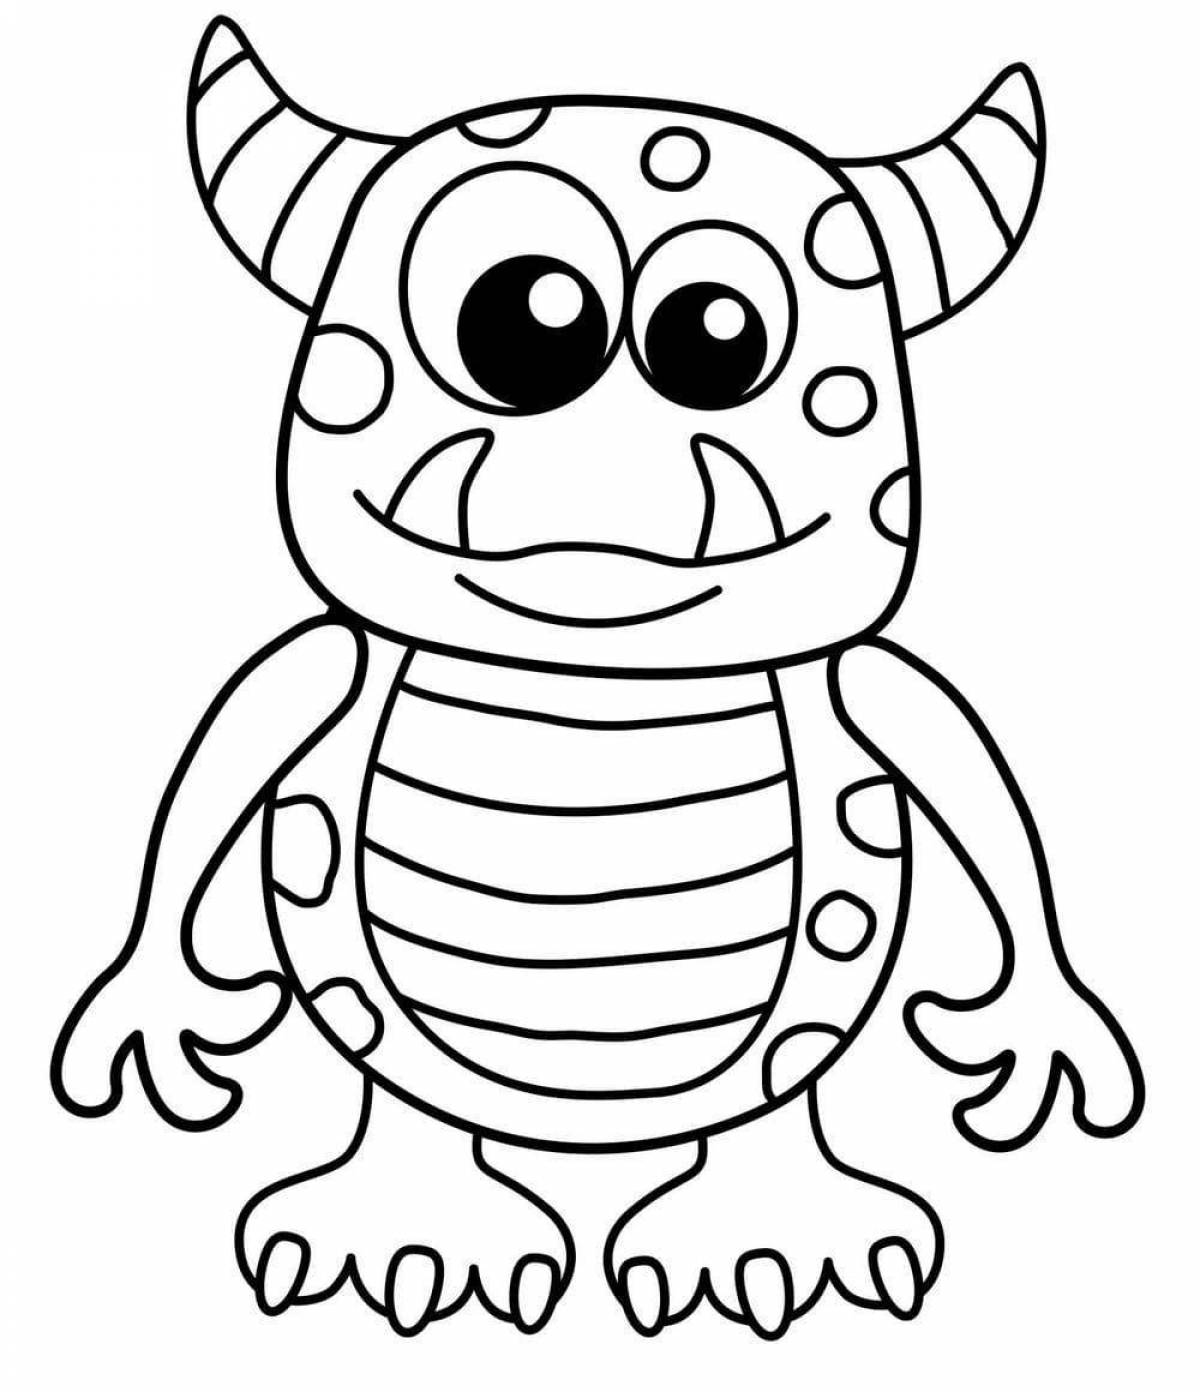 Fun coloring monsters for kids